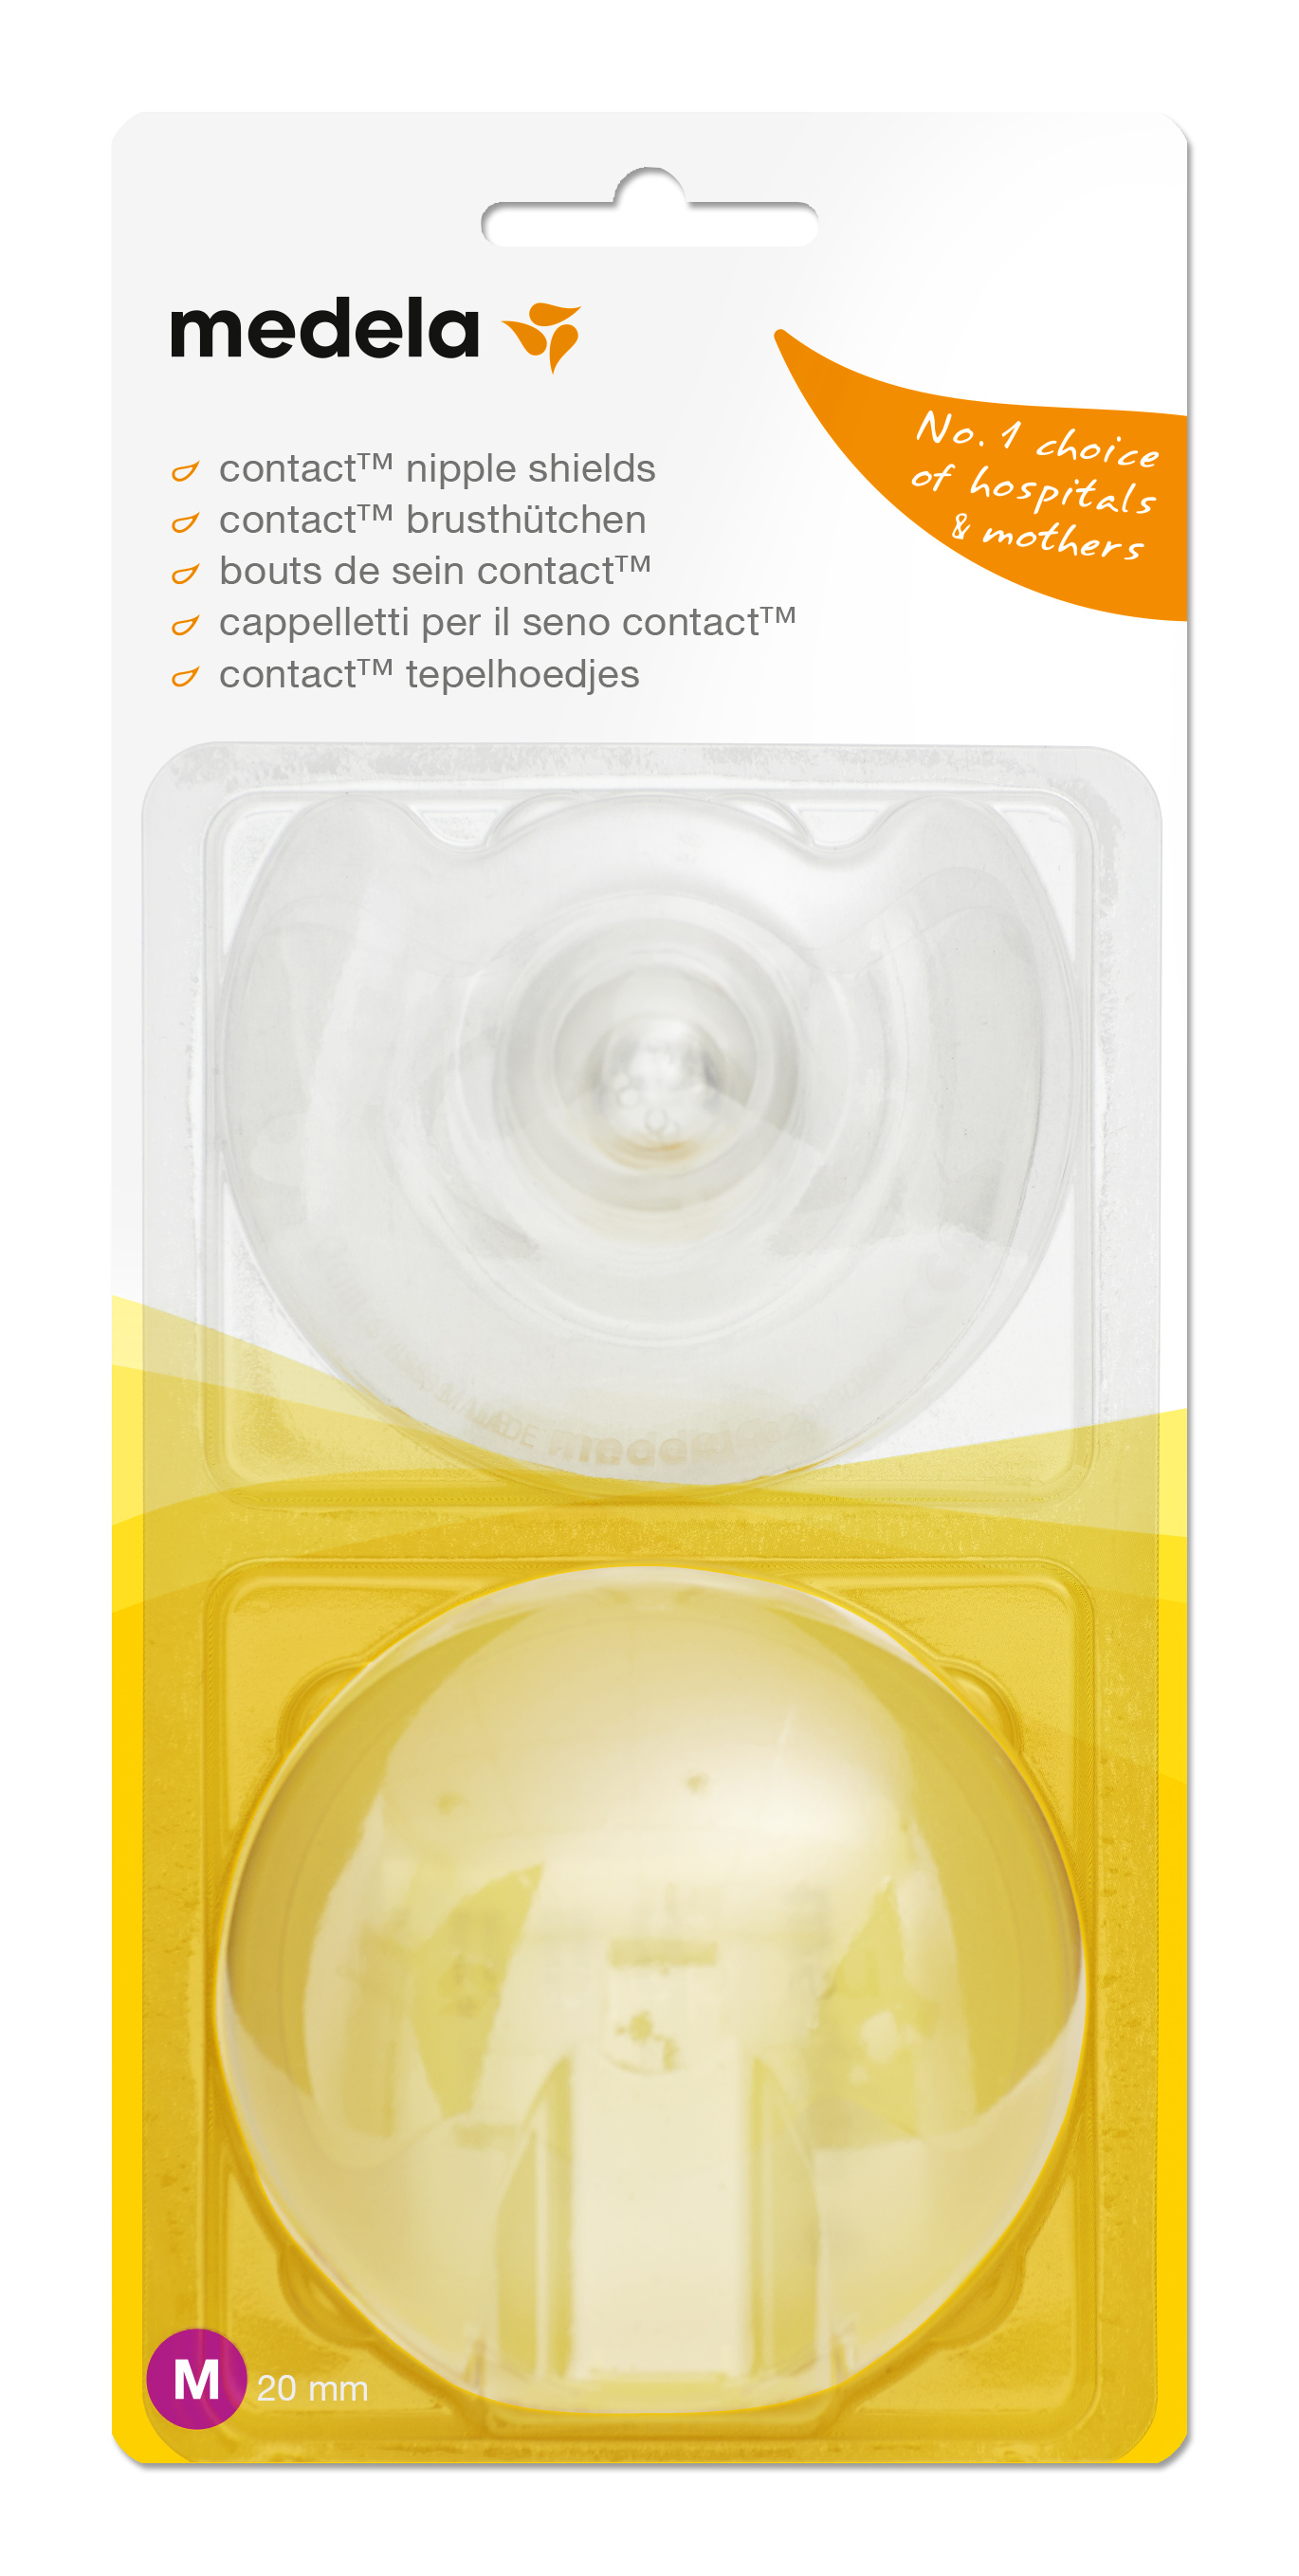 http://f.igtrend.kz/products/001/166/200_1559_packshot_contact_nipple_shields_m.jpg